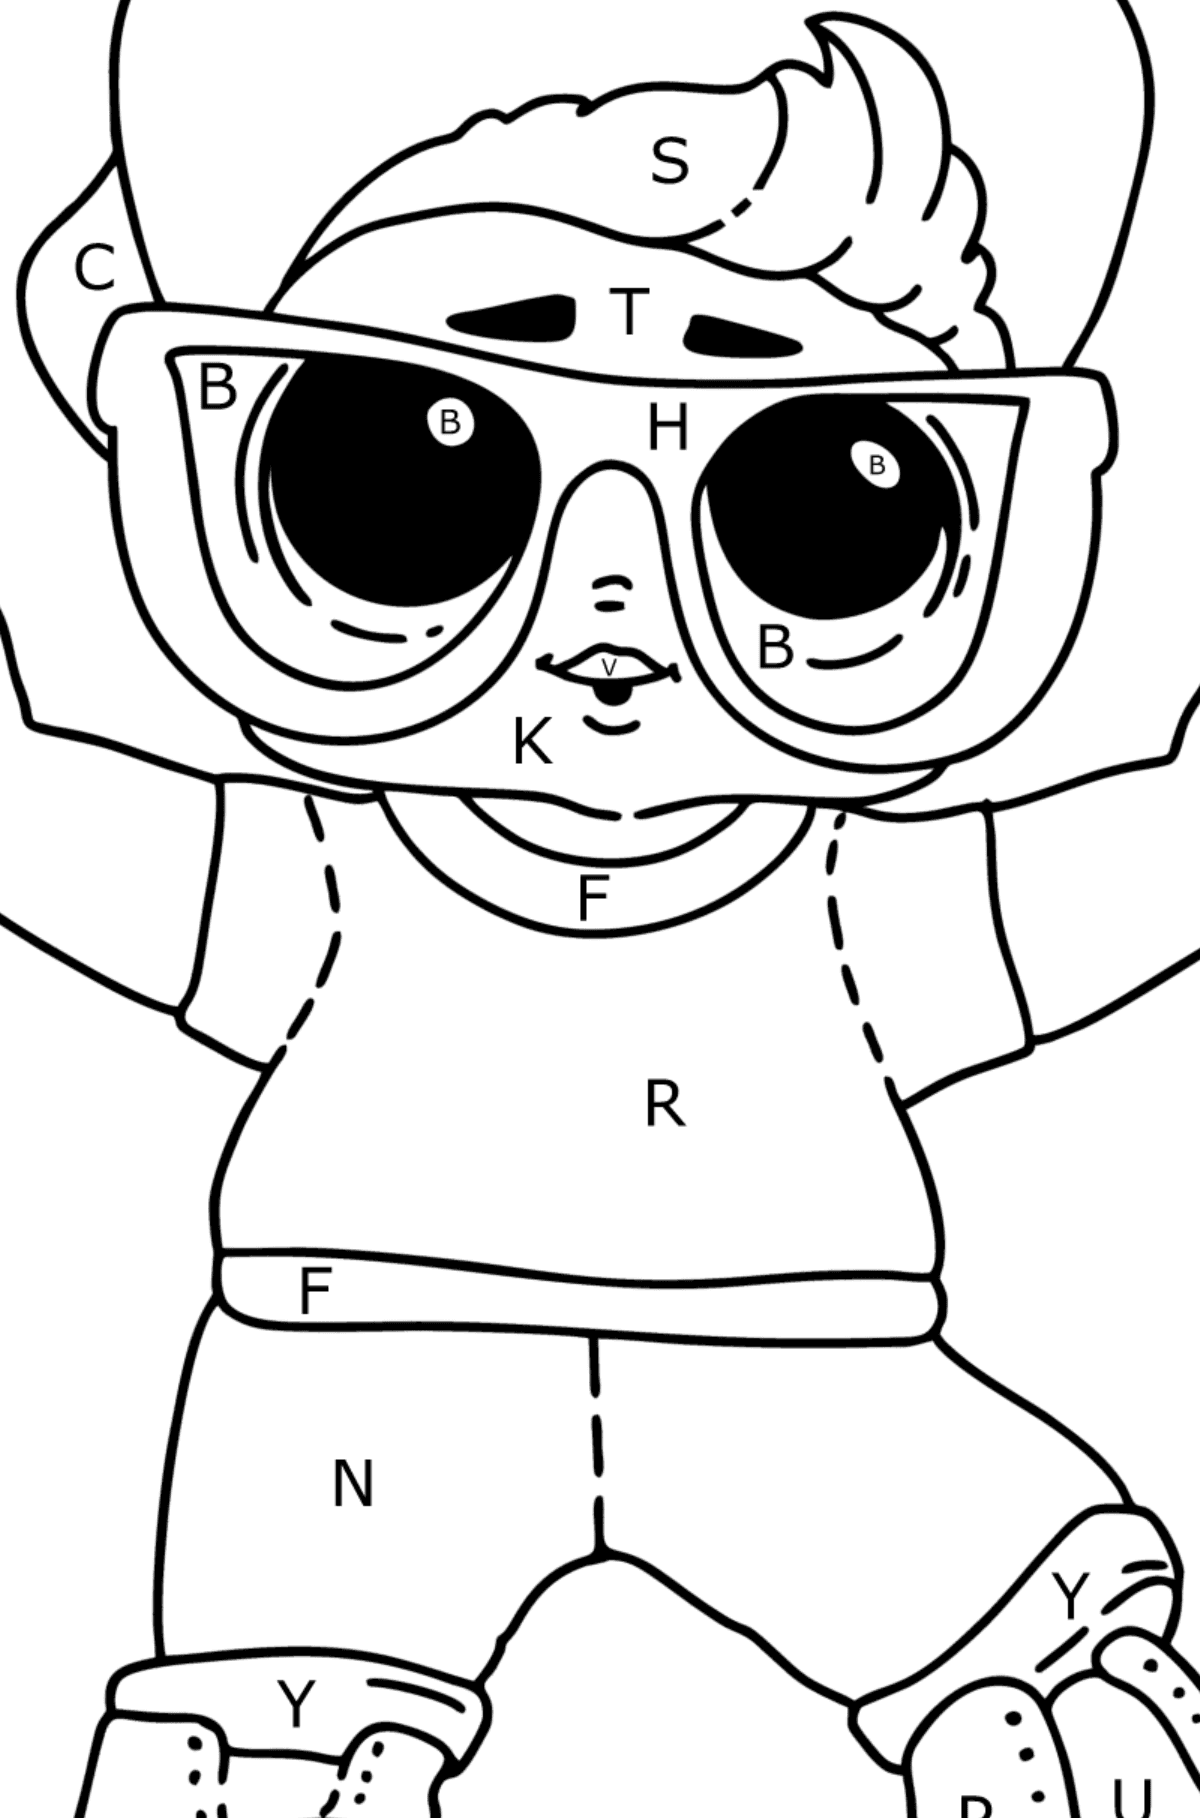 Coloring page LOL boy Next Door - Coloring by Letters for Kids